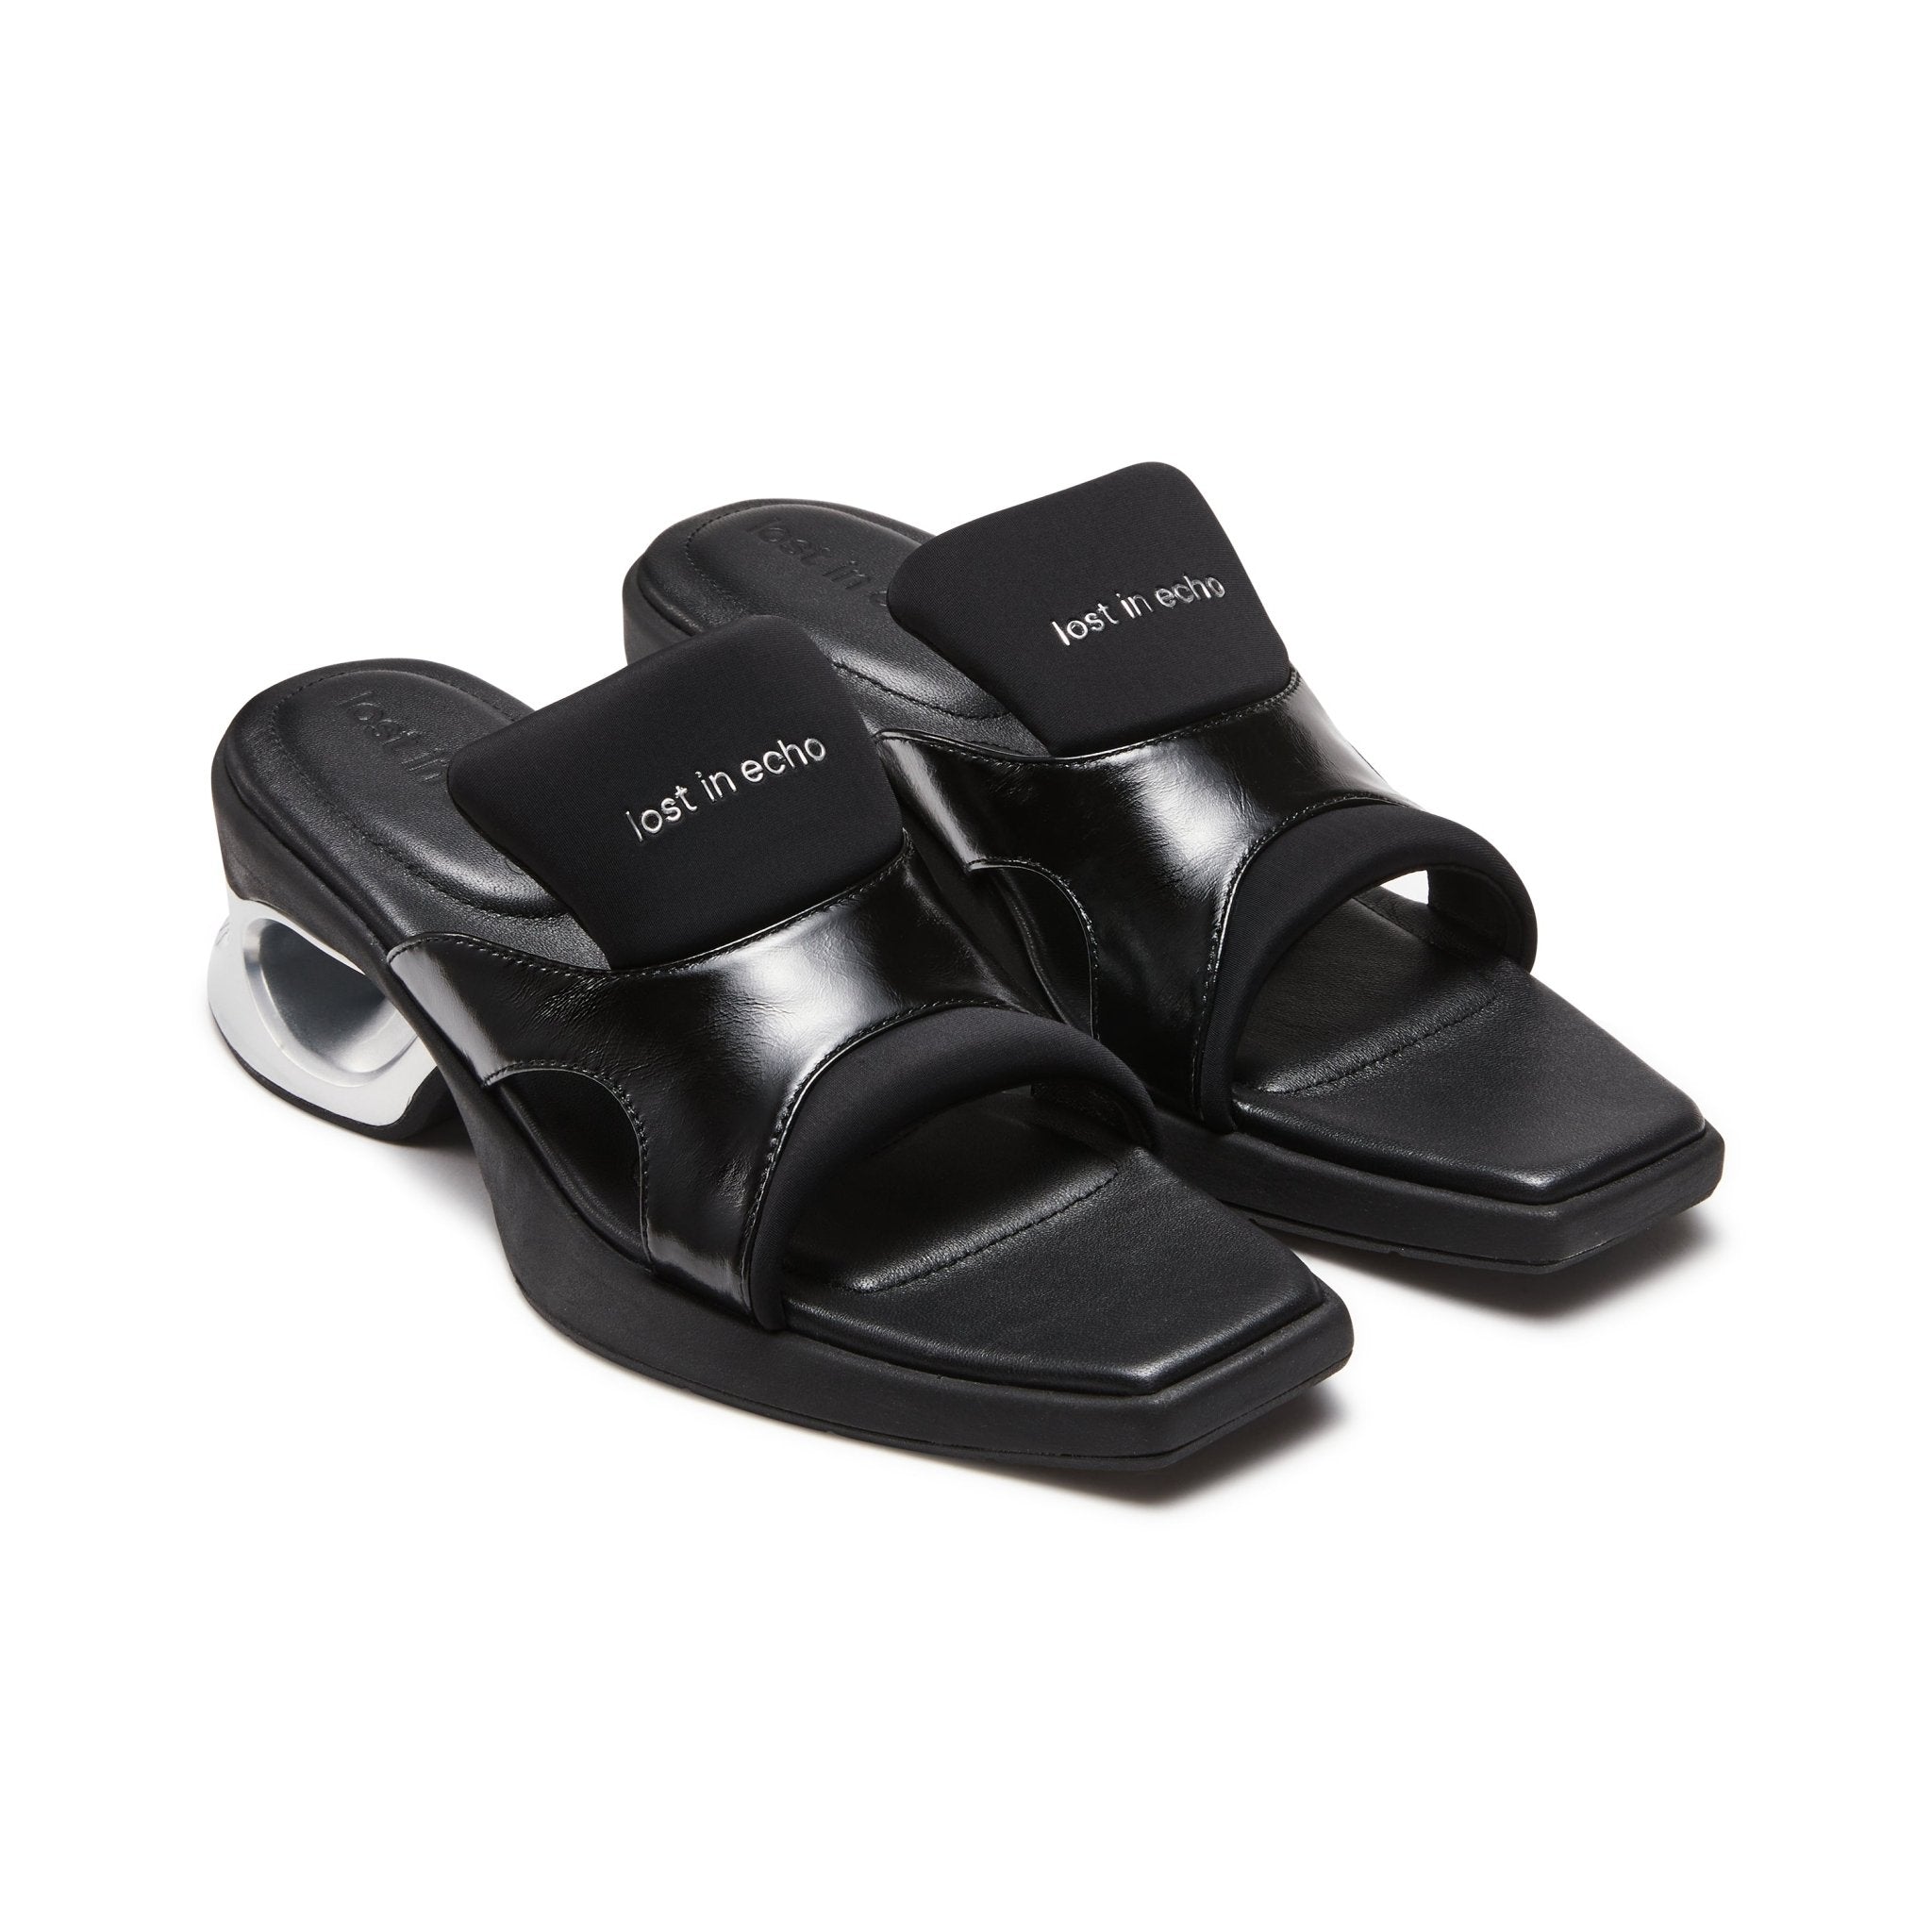 LOST IN ECHO Pointed Square Toe Sports Sandals in Black | MADA IN CHINA